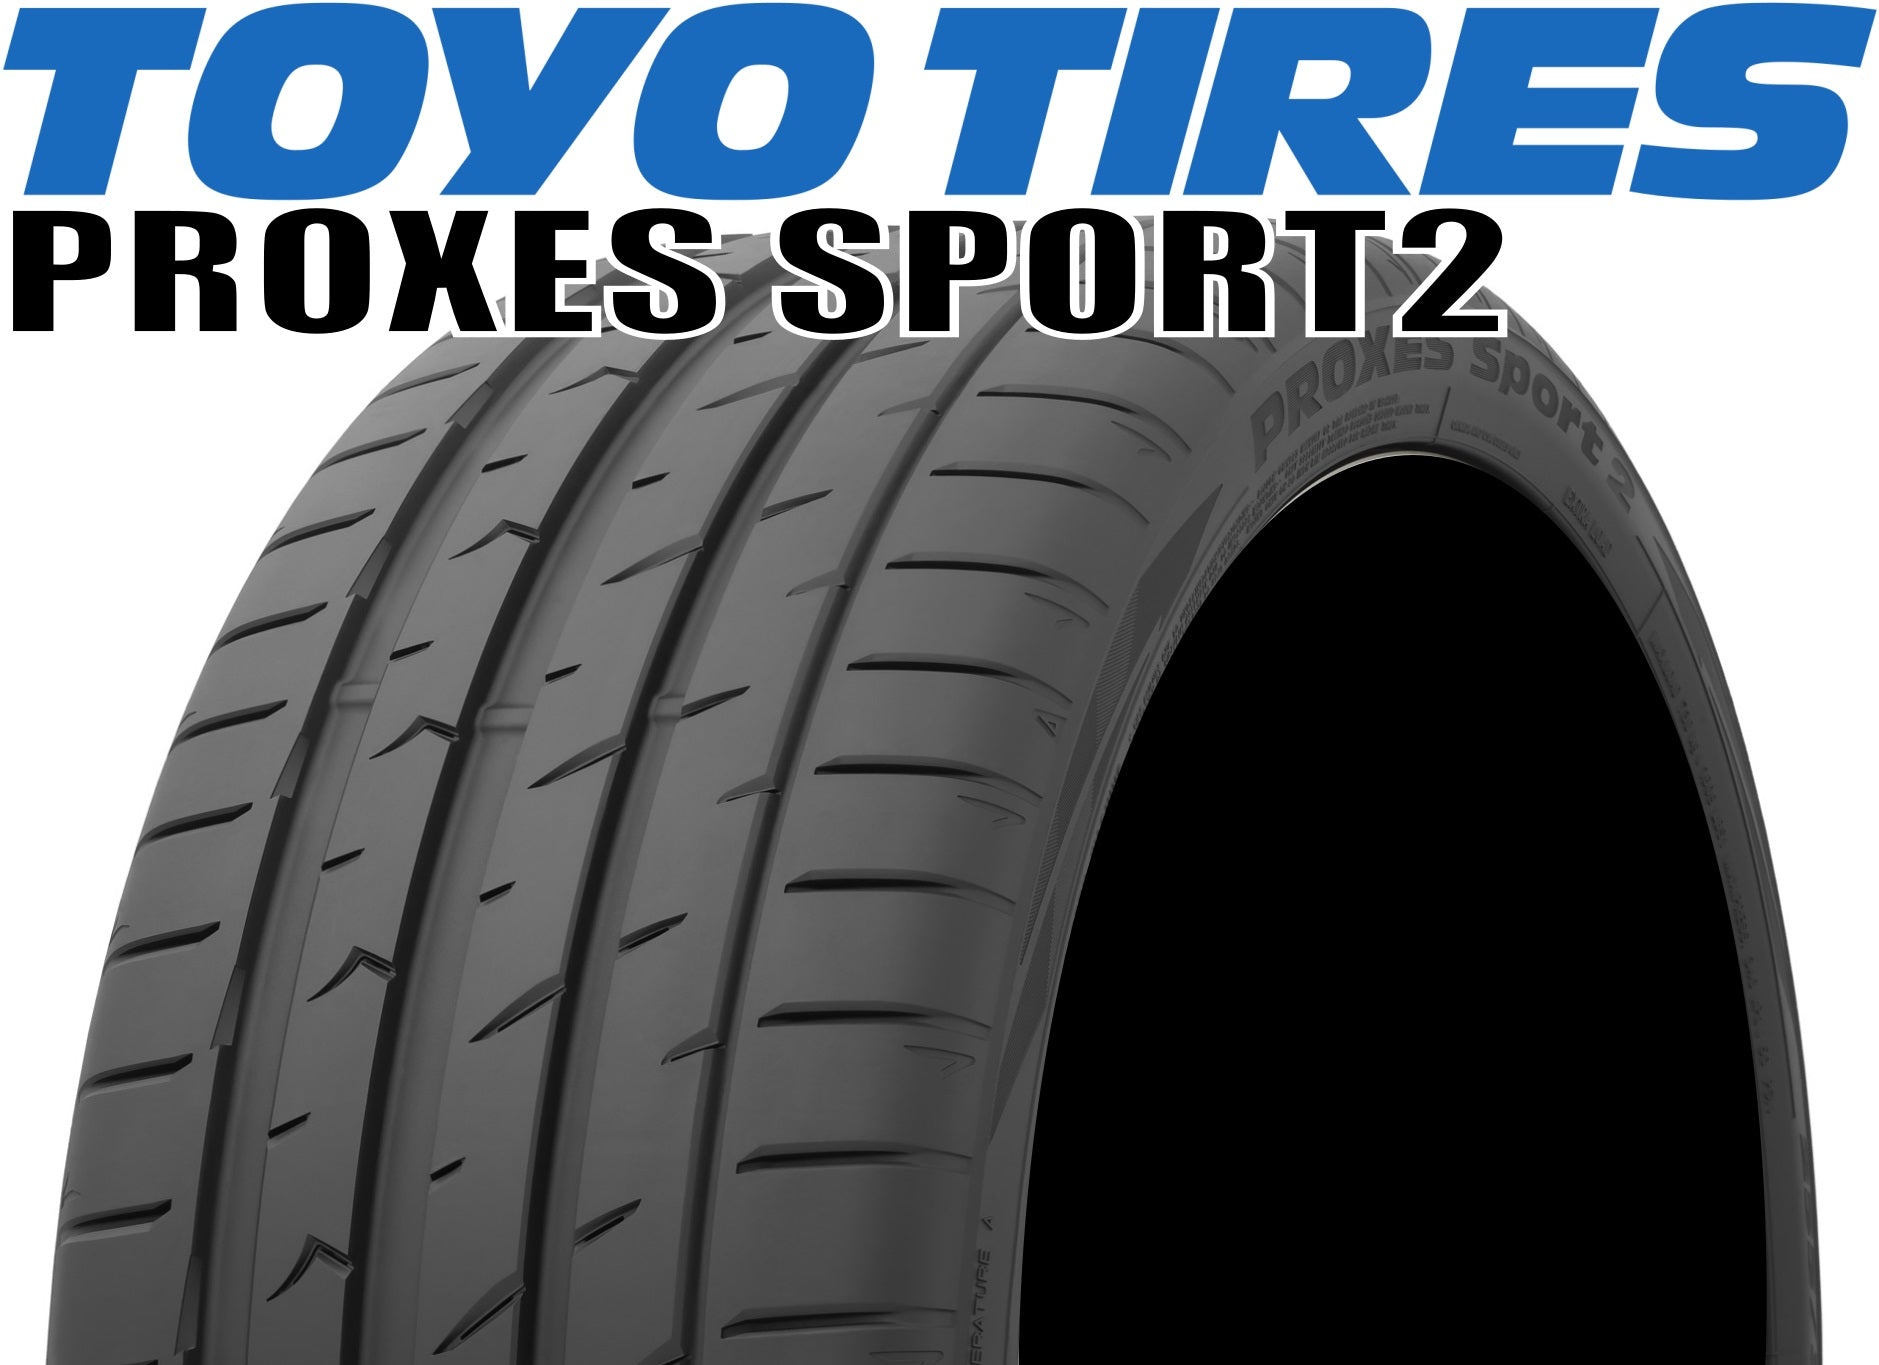 TOYO TIRES PROXES SPORT2(トーヨー プロクセススポーツ) 295/40R21 111Y 295/40-21